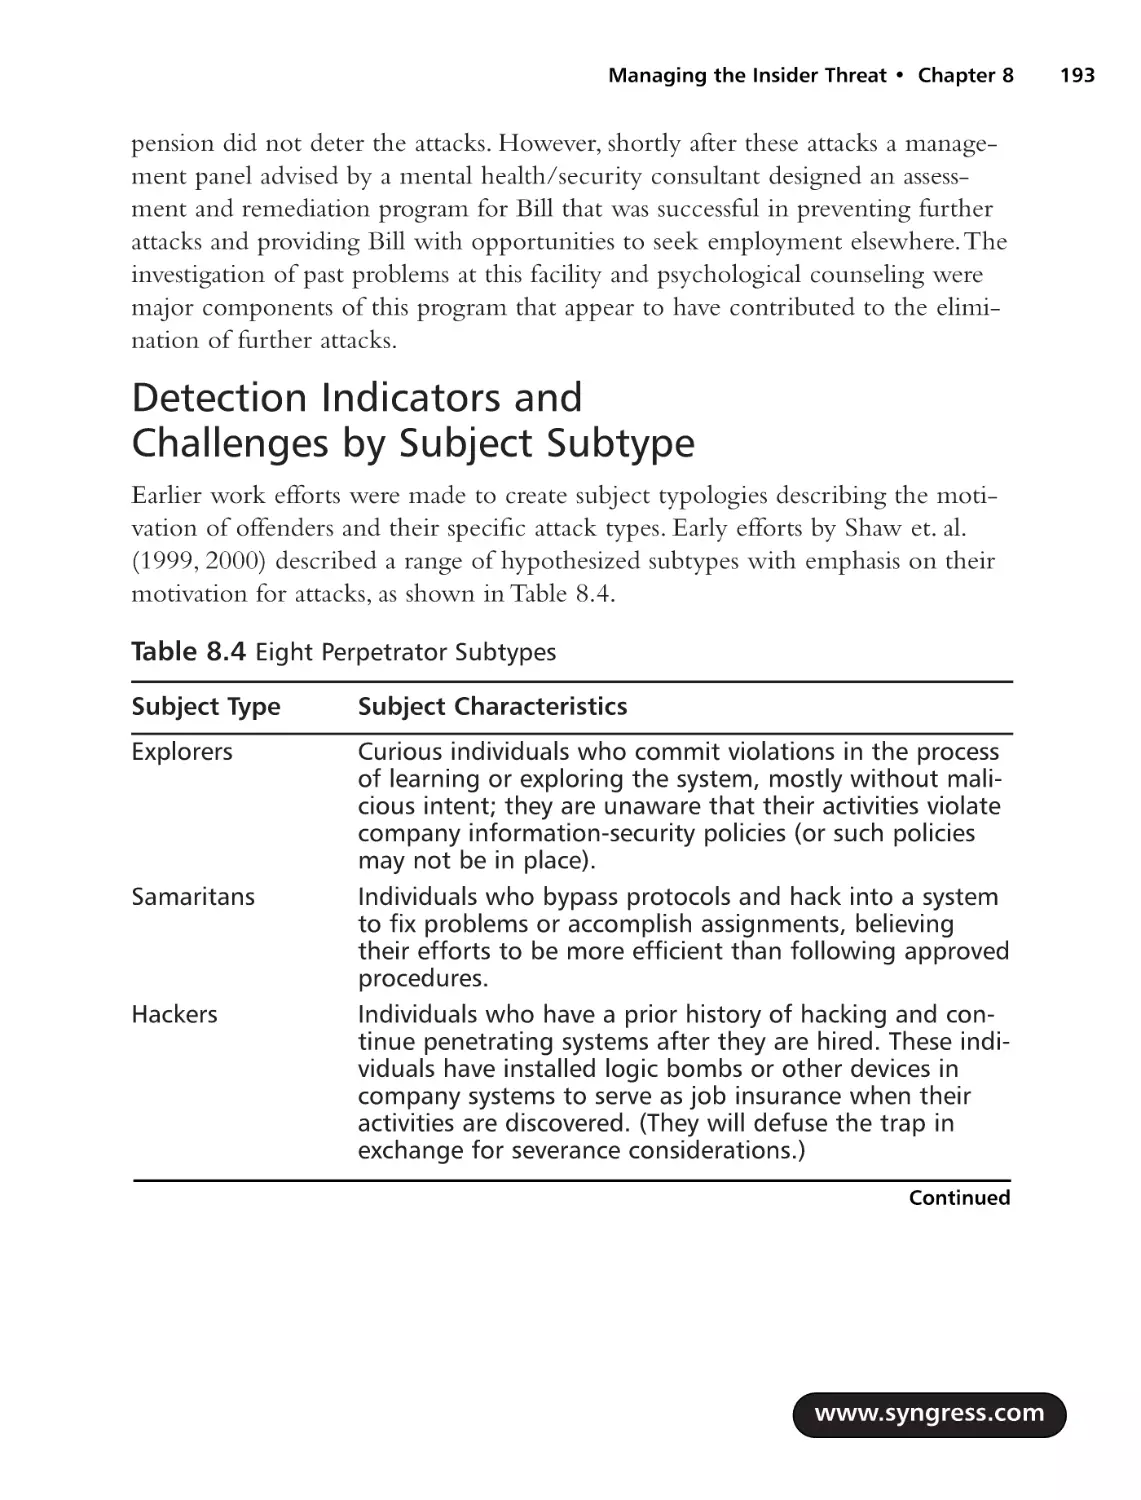 Detection Indicators and Challenges by Subject Subtype